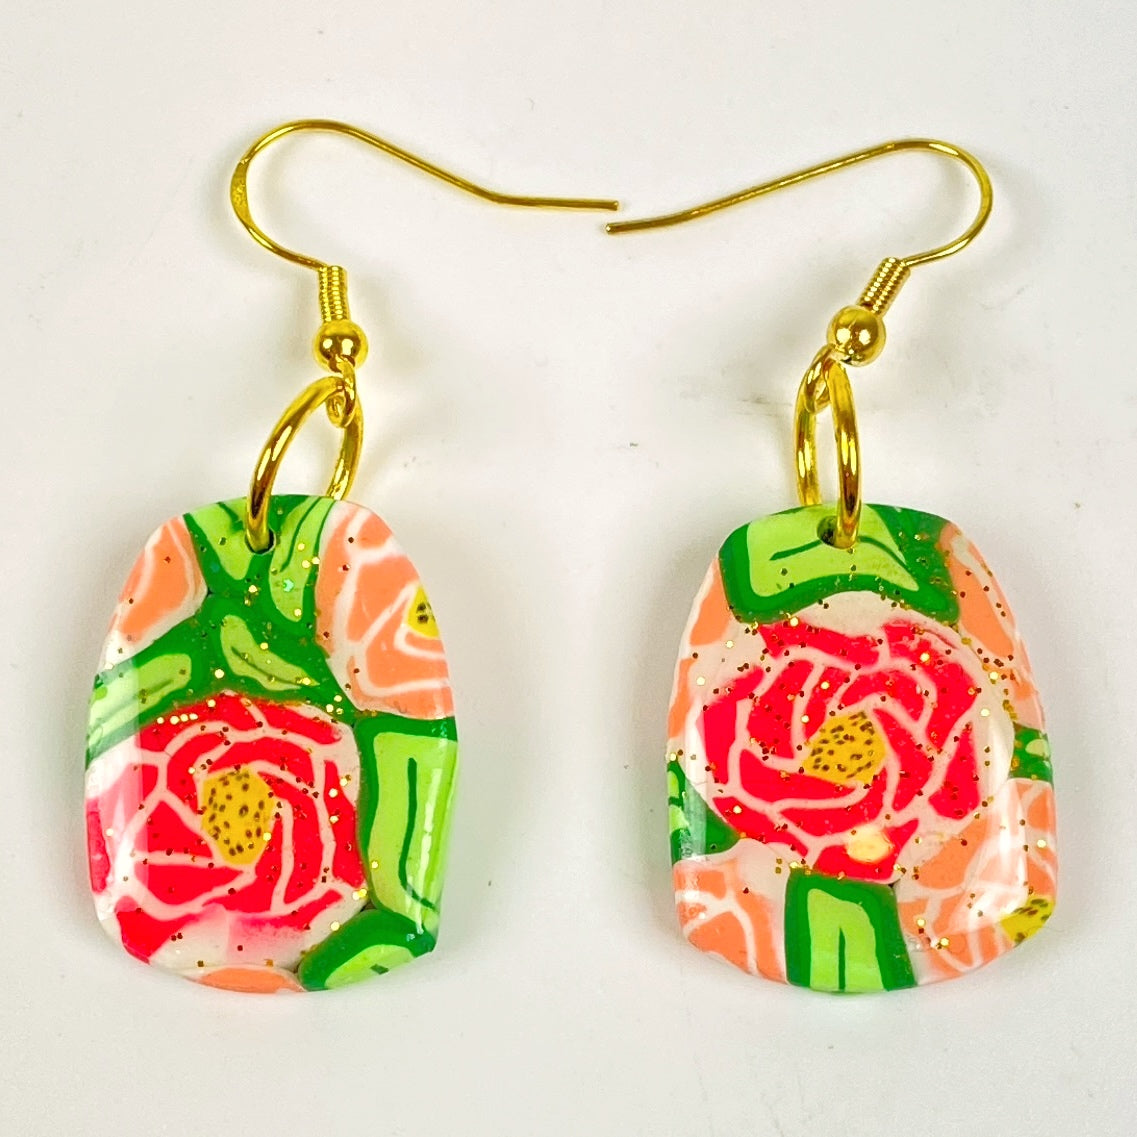 The Roses Handmade Polymer Clay Dangle Earrings on a white background